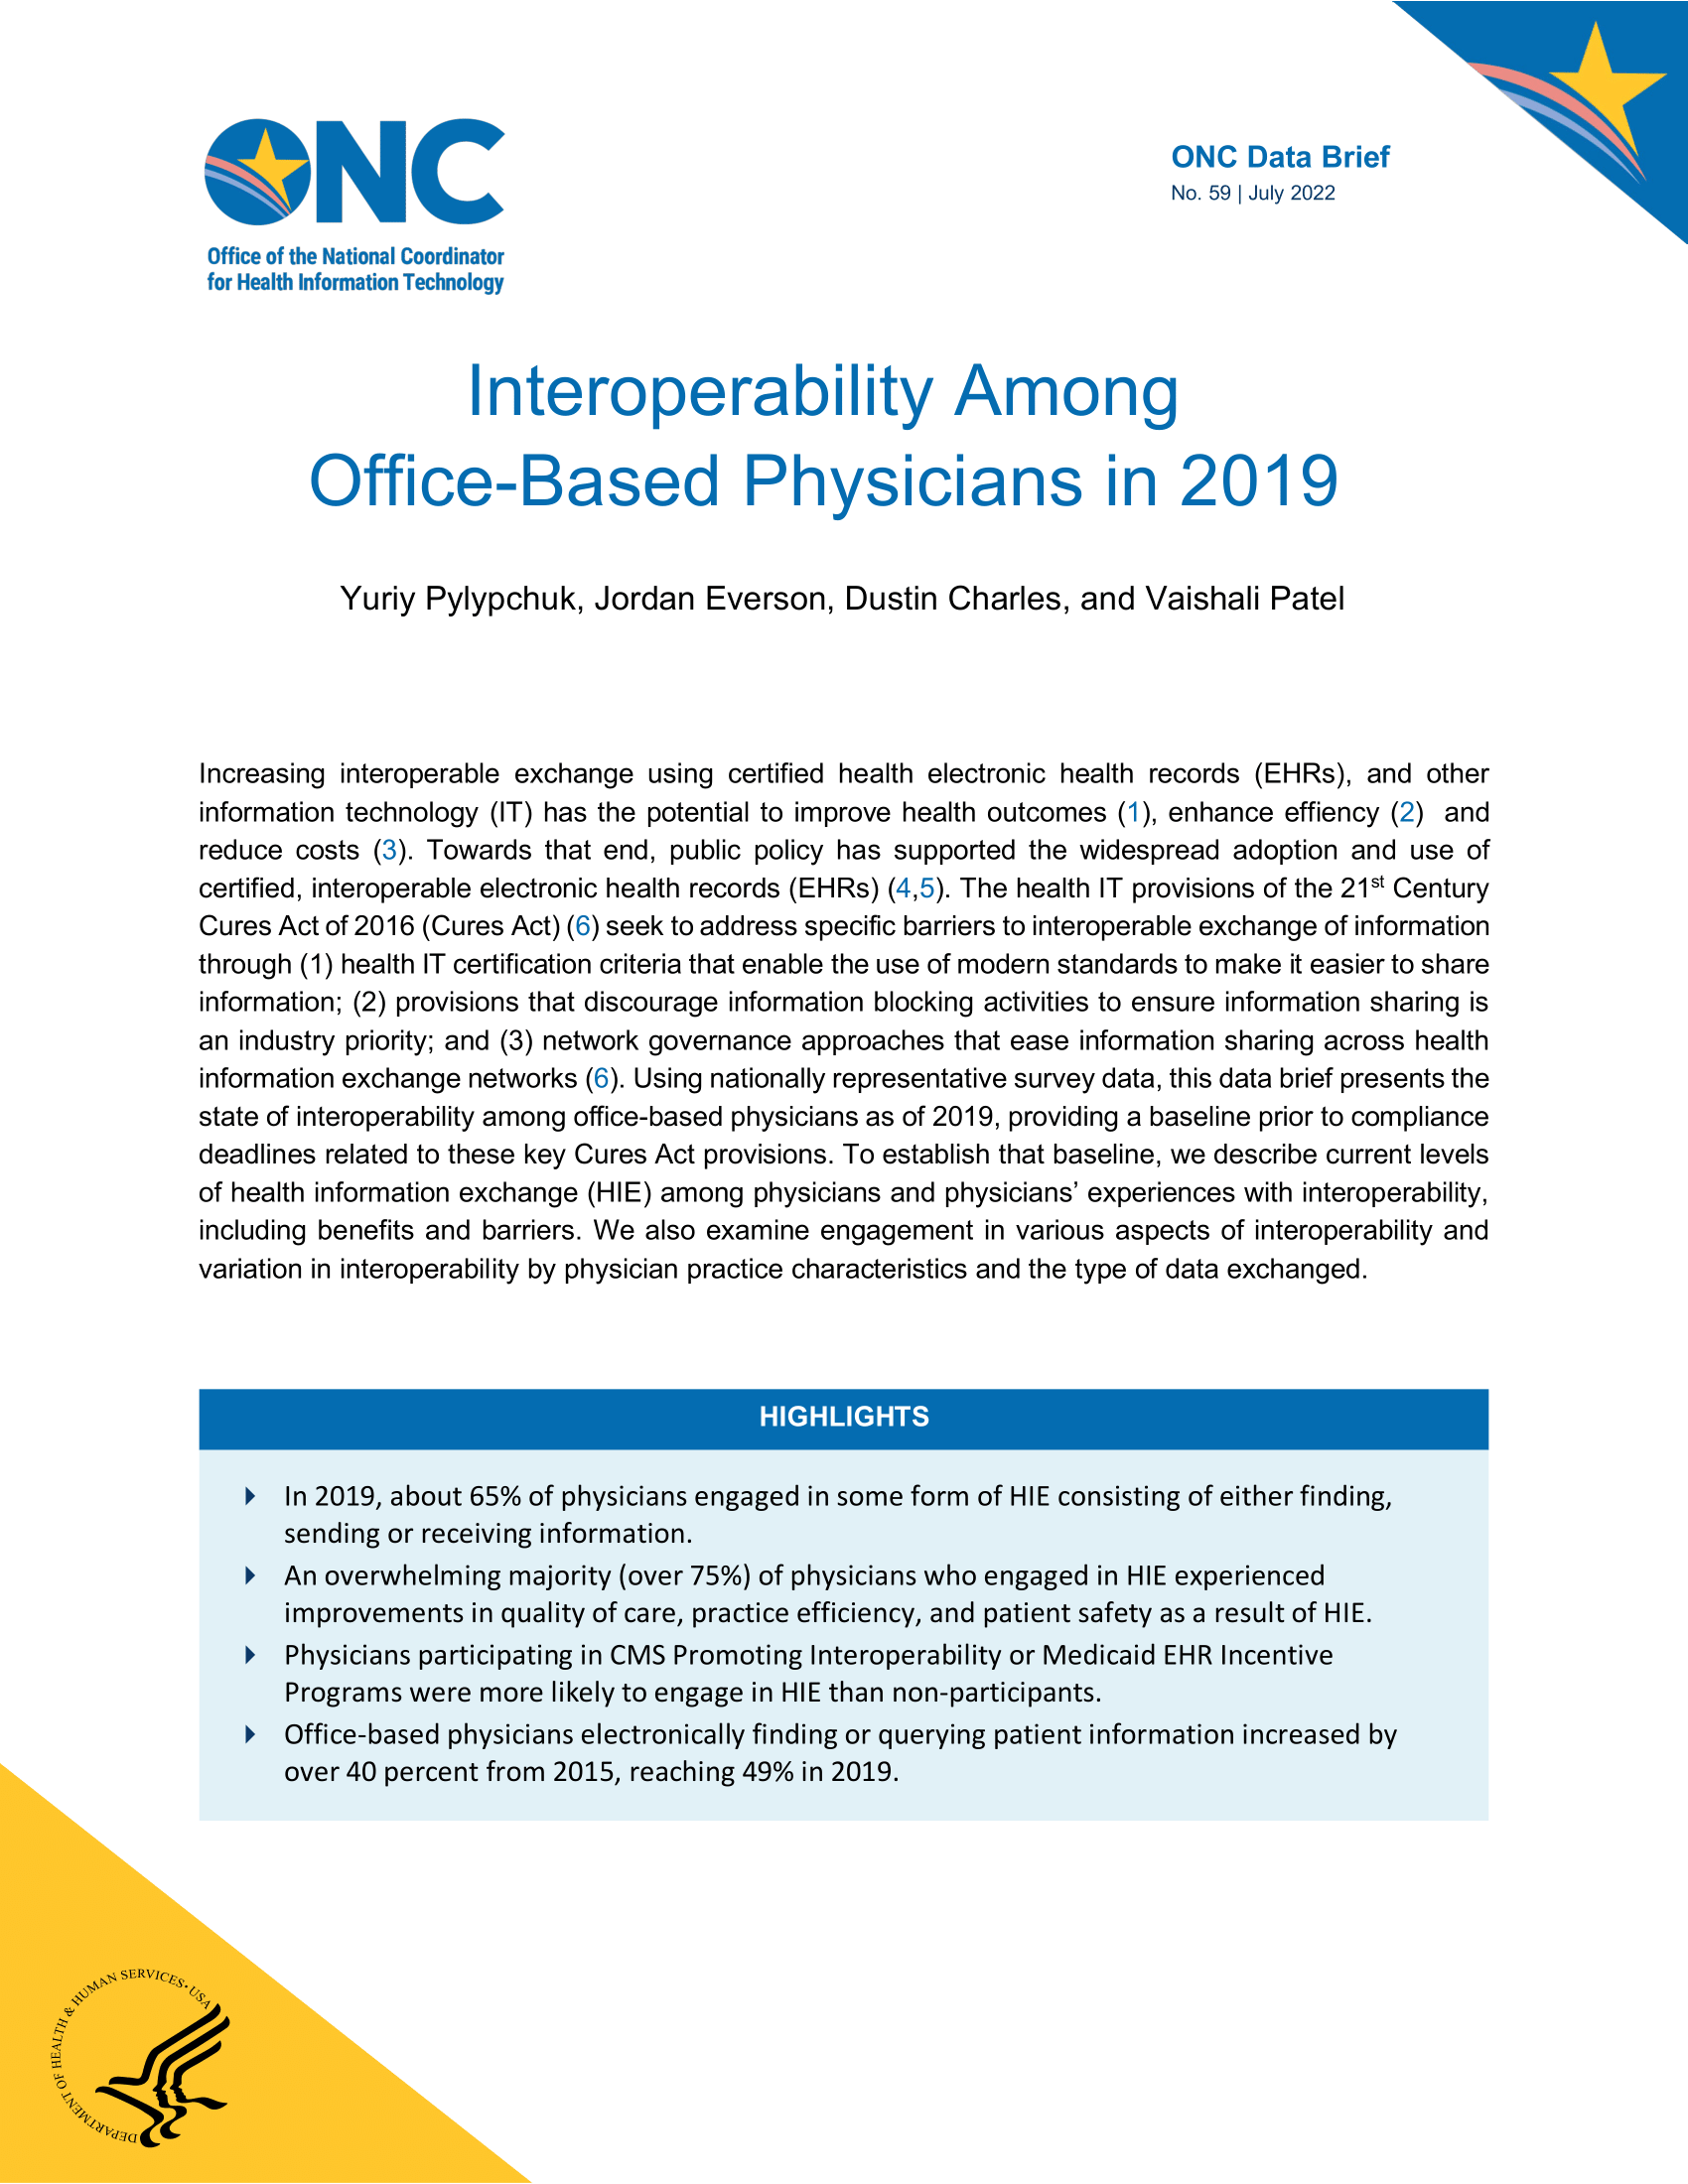 Interoperability Among Office-Based Physicians in 2019